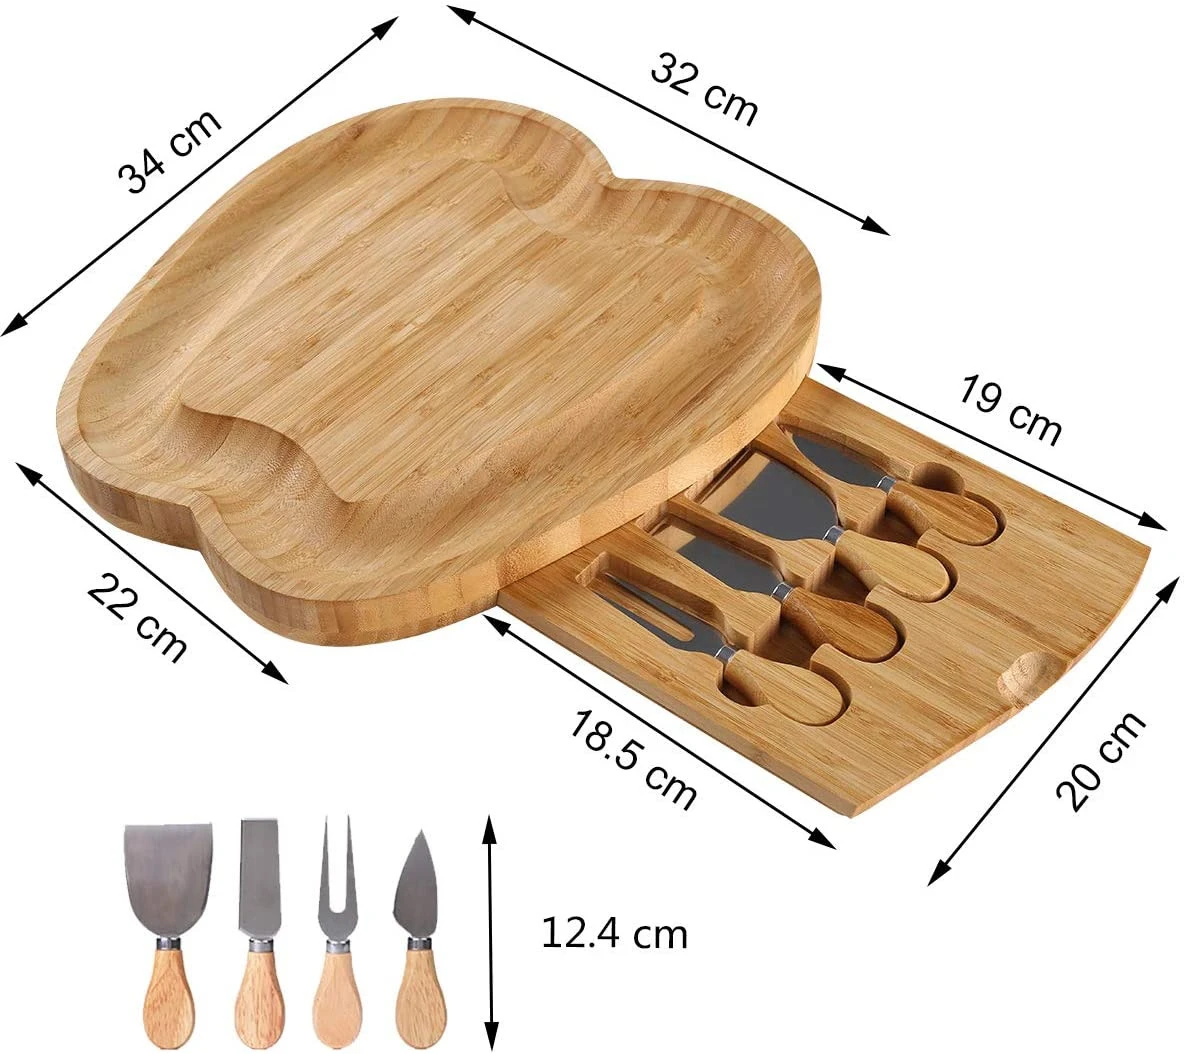 Bamboo Cheese Platter and Knives Set, Cheese Fruit Board with Slide-Out Drawer, Charcuterie Platter Serving Tray